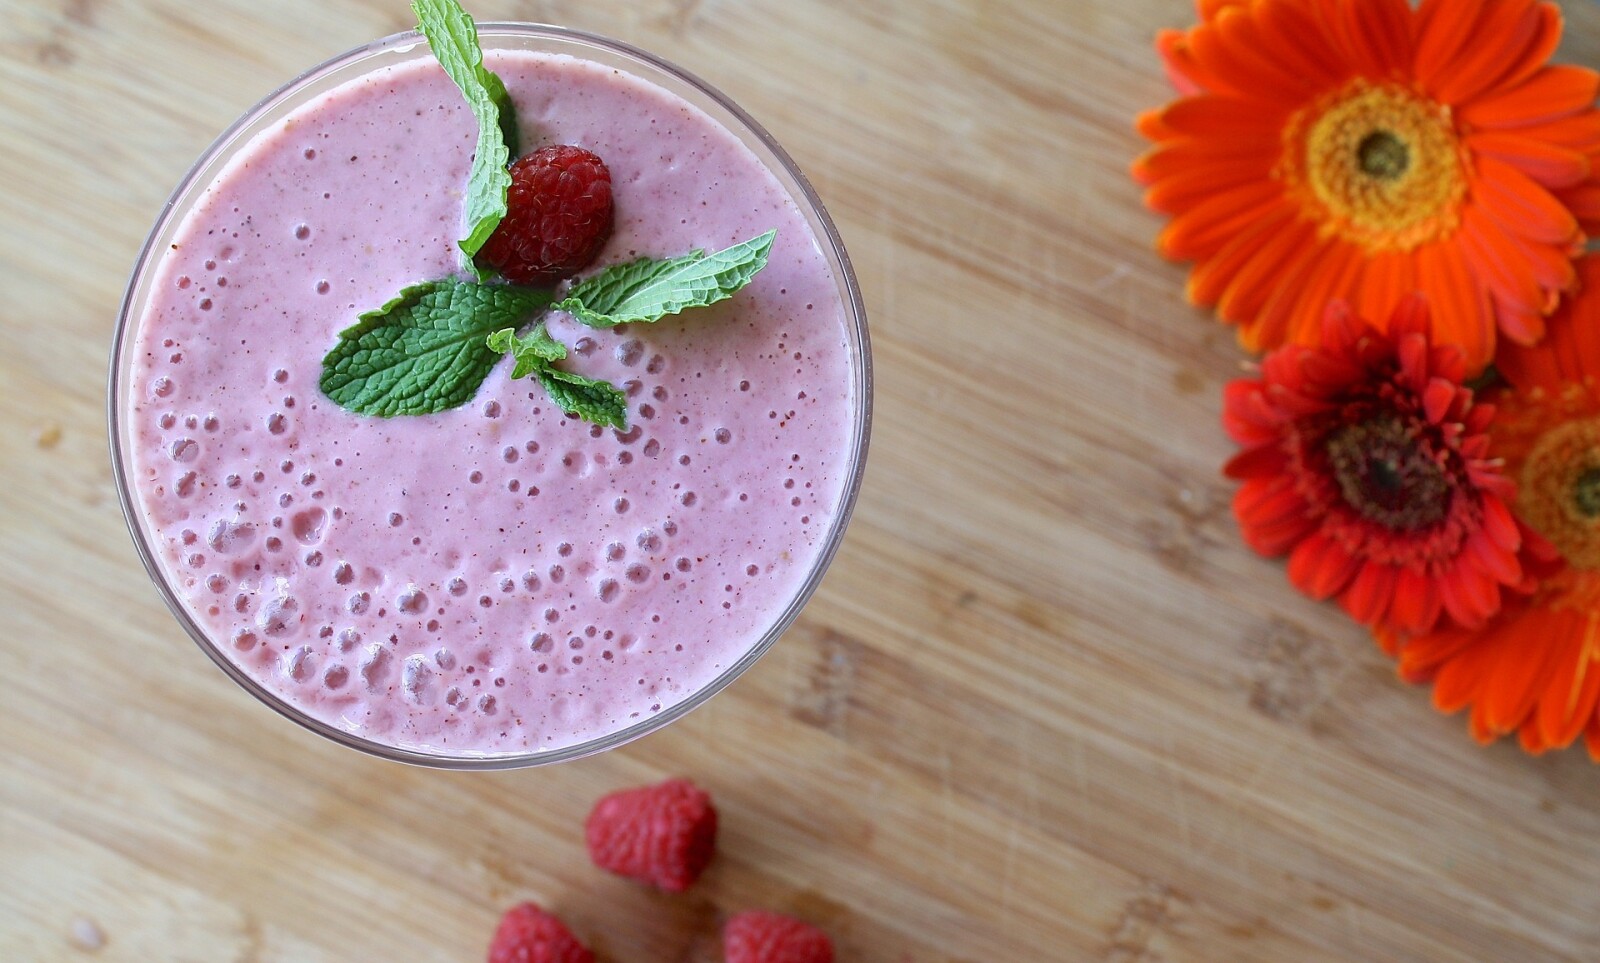 Fresh Smoothies Without All the Hassle